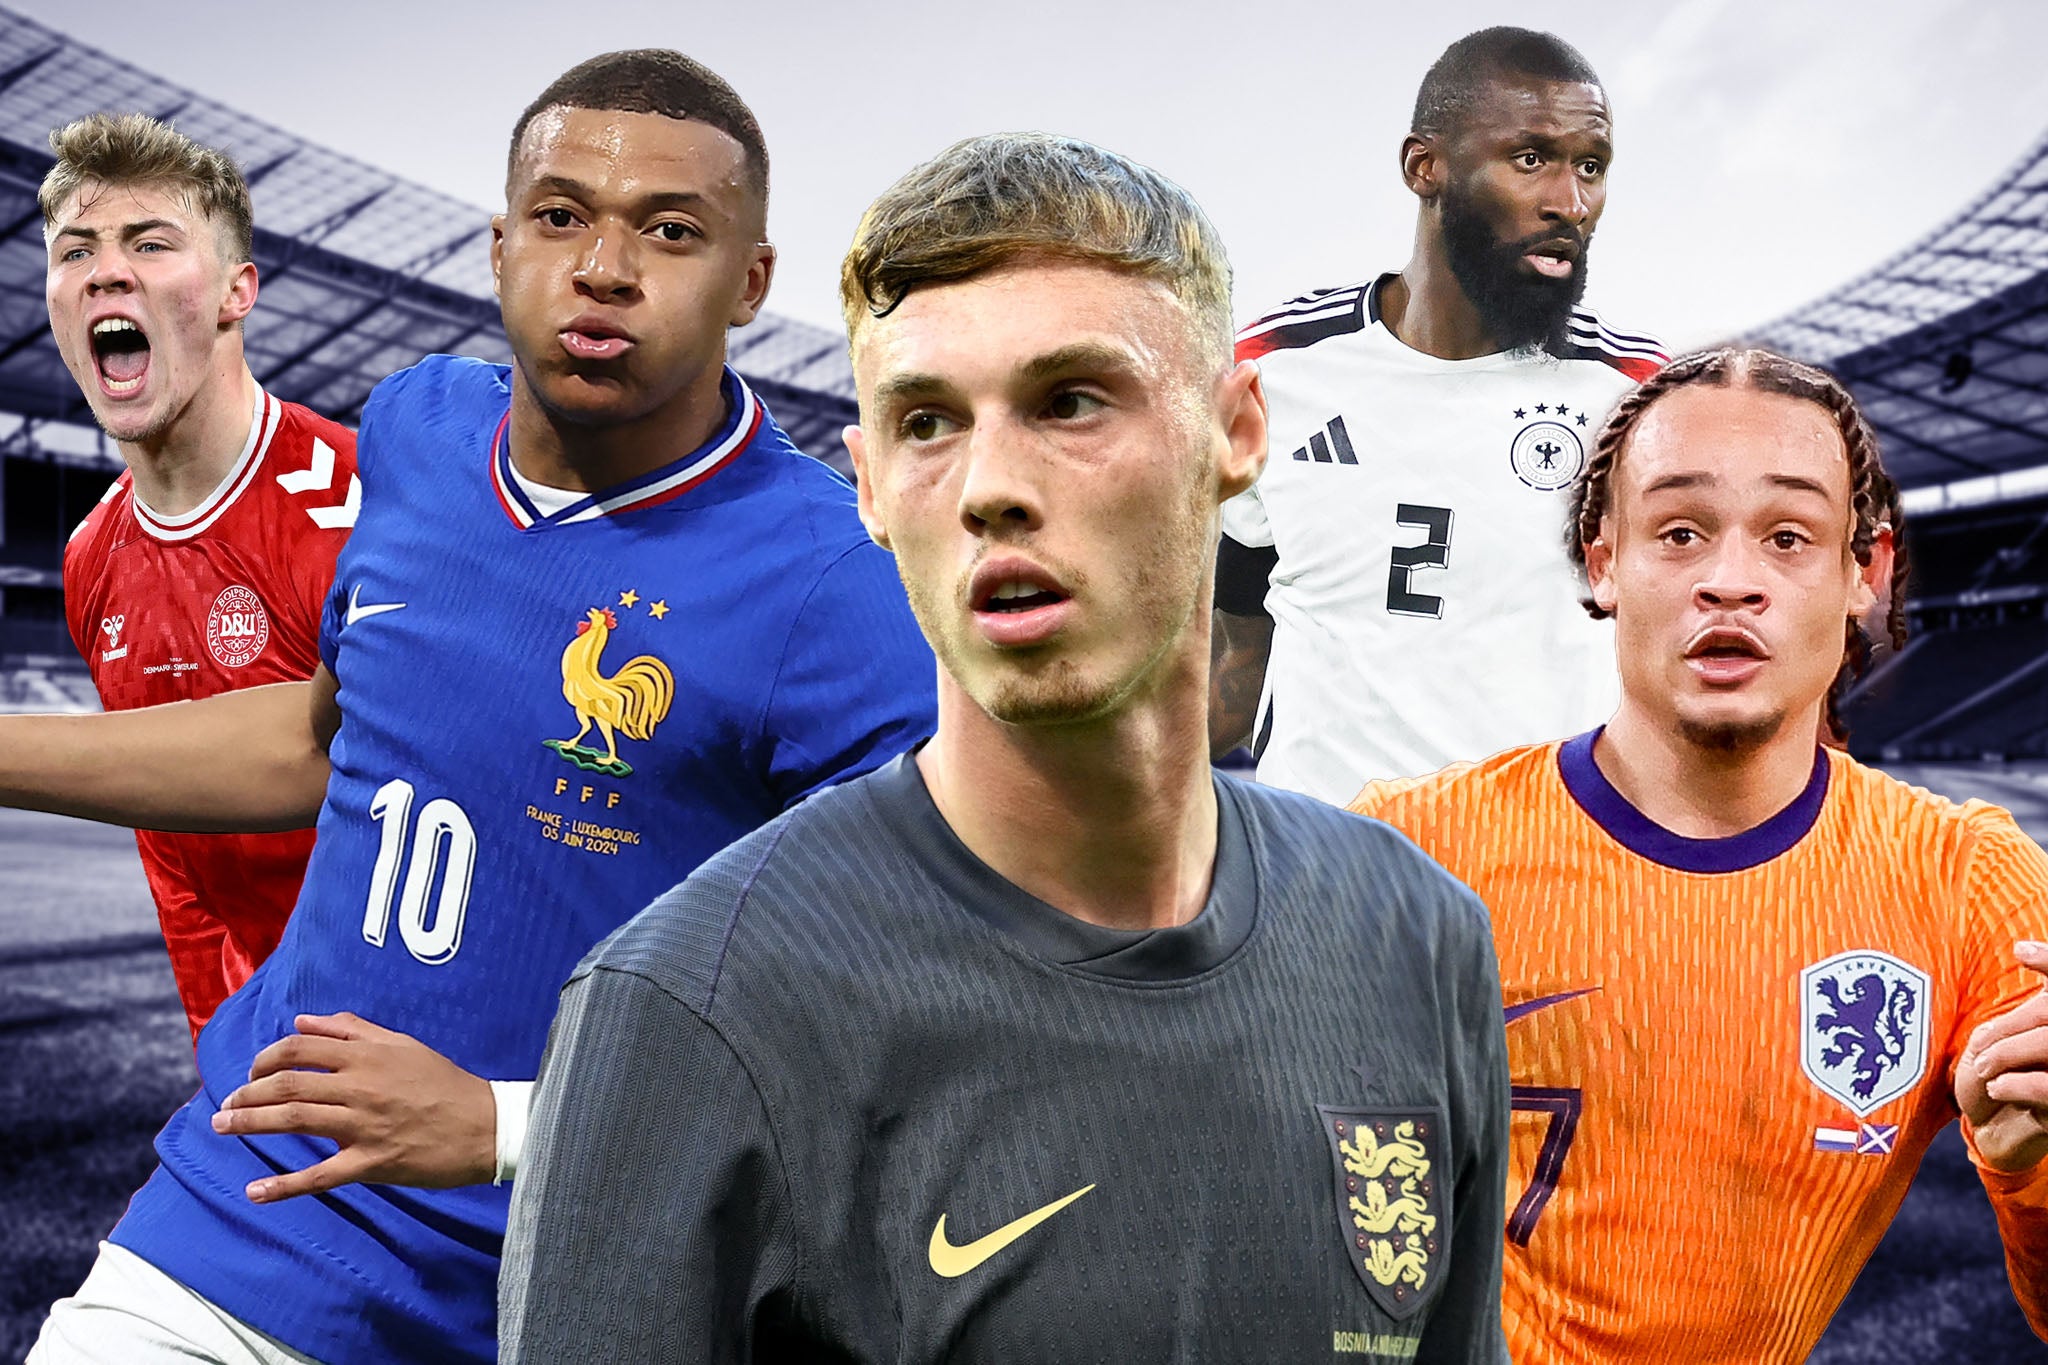 Fantasy football is back on the radar for Euro 2024